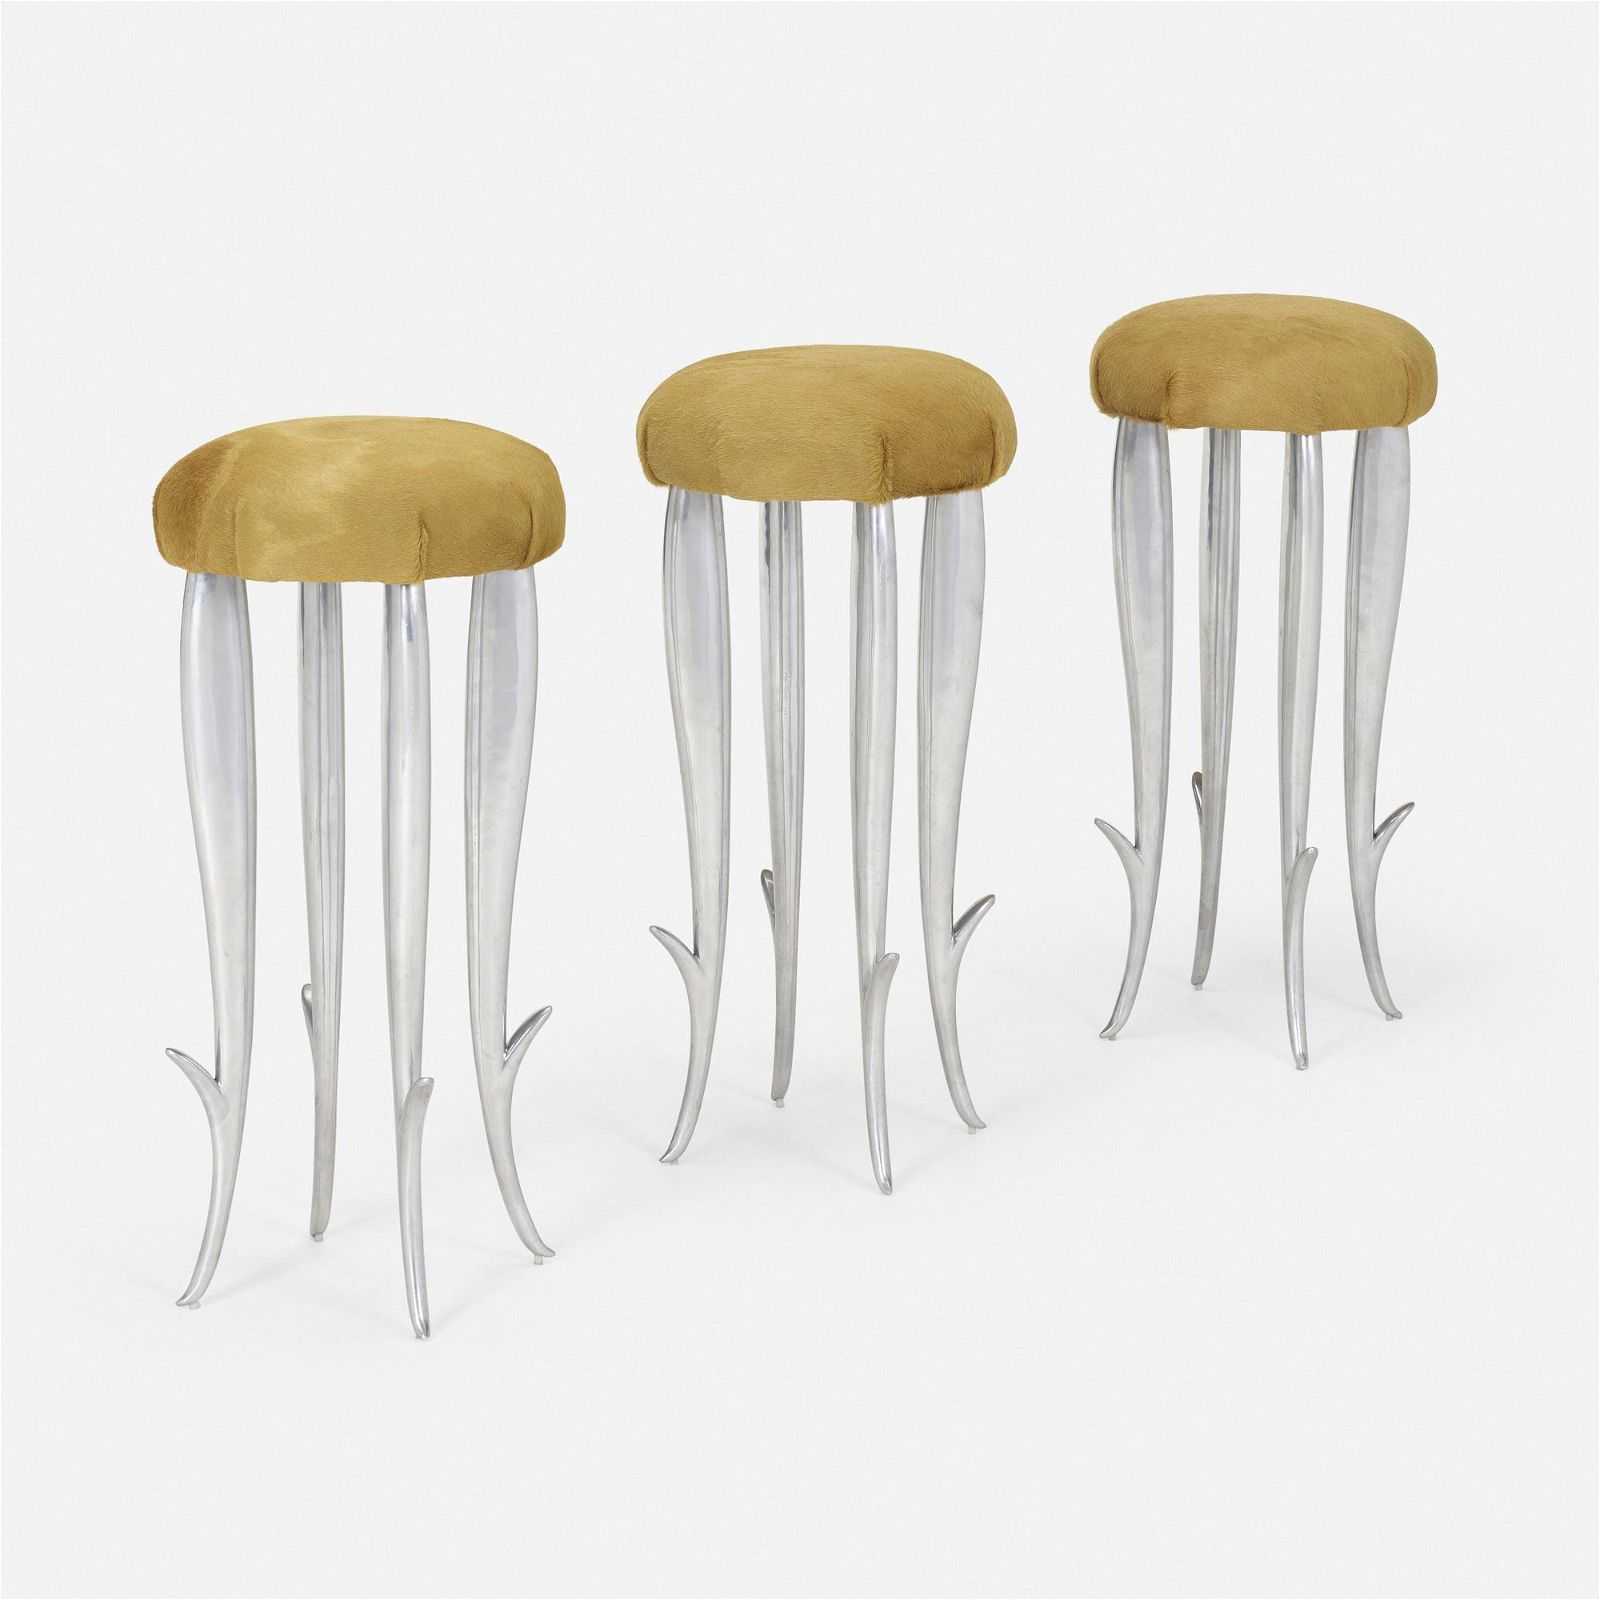 This trio of Philippe Starck Royalton barstools, made for the New York hotel of the same name, earned $4,200 plus the buyer’s premium in January 2023. Image courtesy of Wright and LiveAuctioneers.